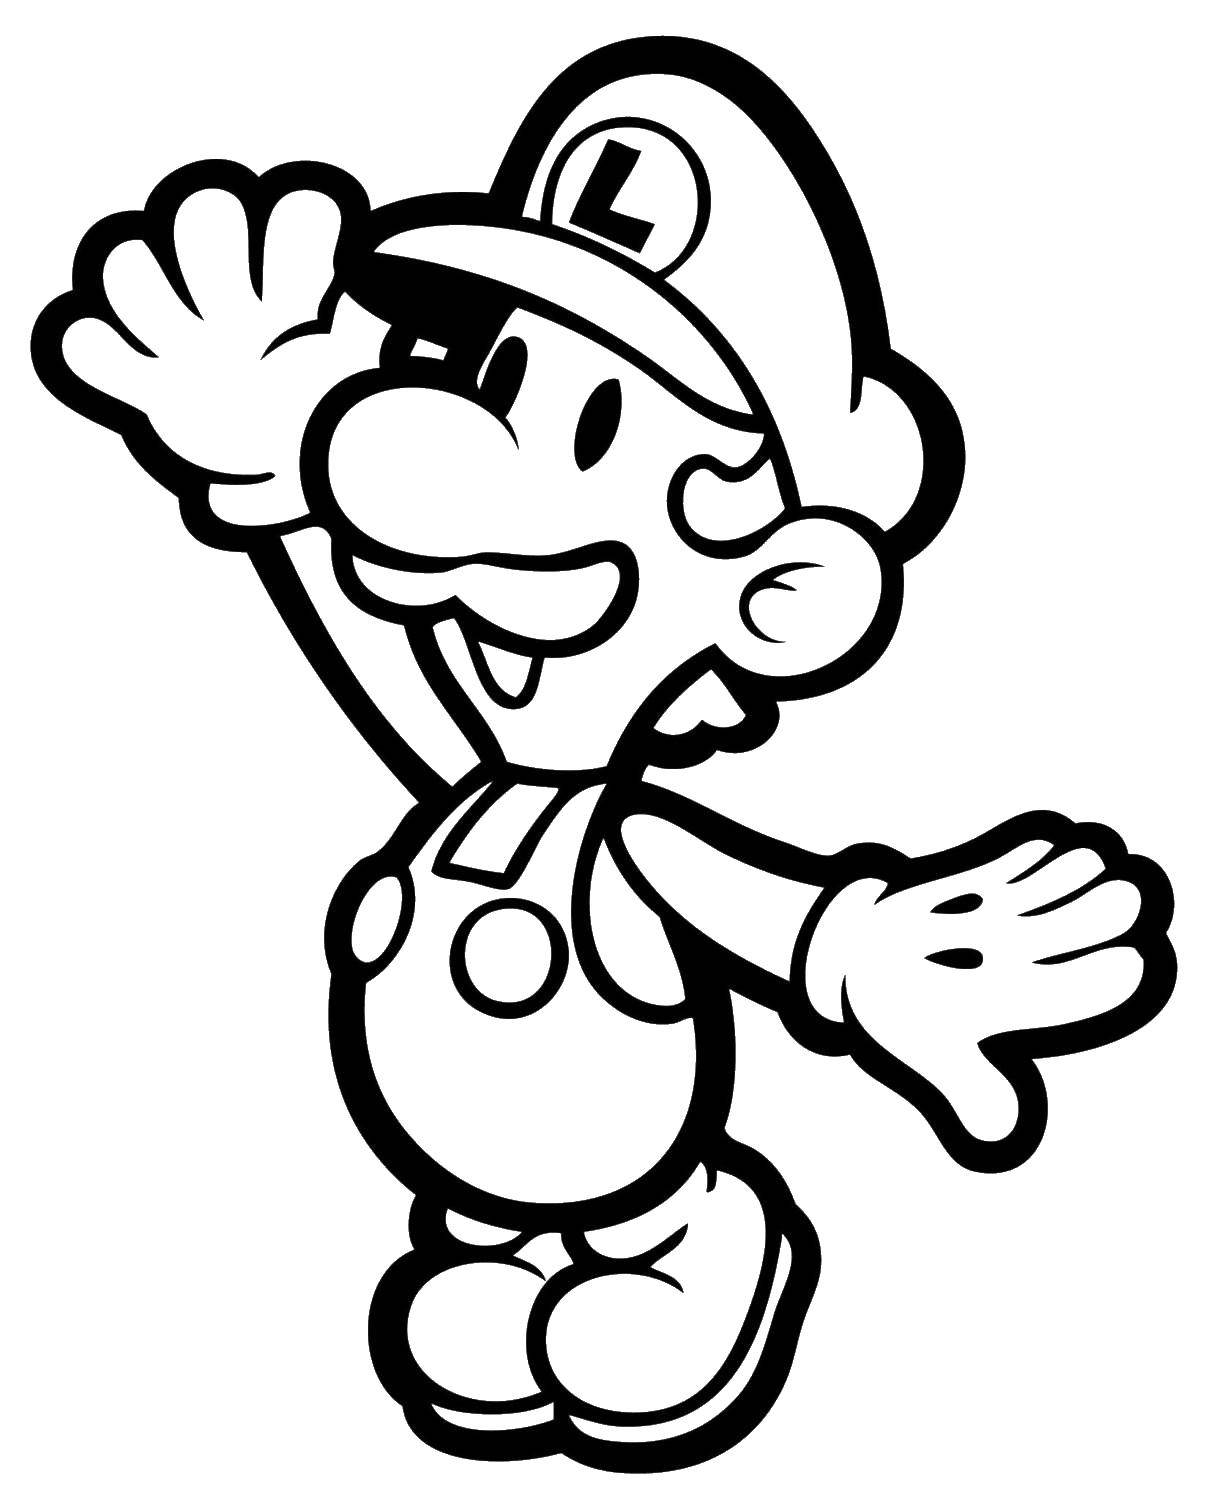 Coloring Mario. Category The character from the game. Tags:  the game, Mario, coins.